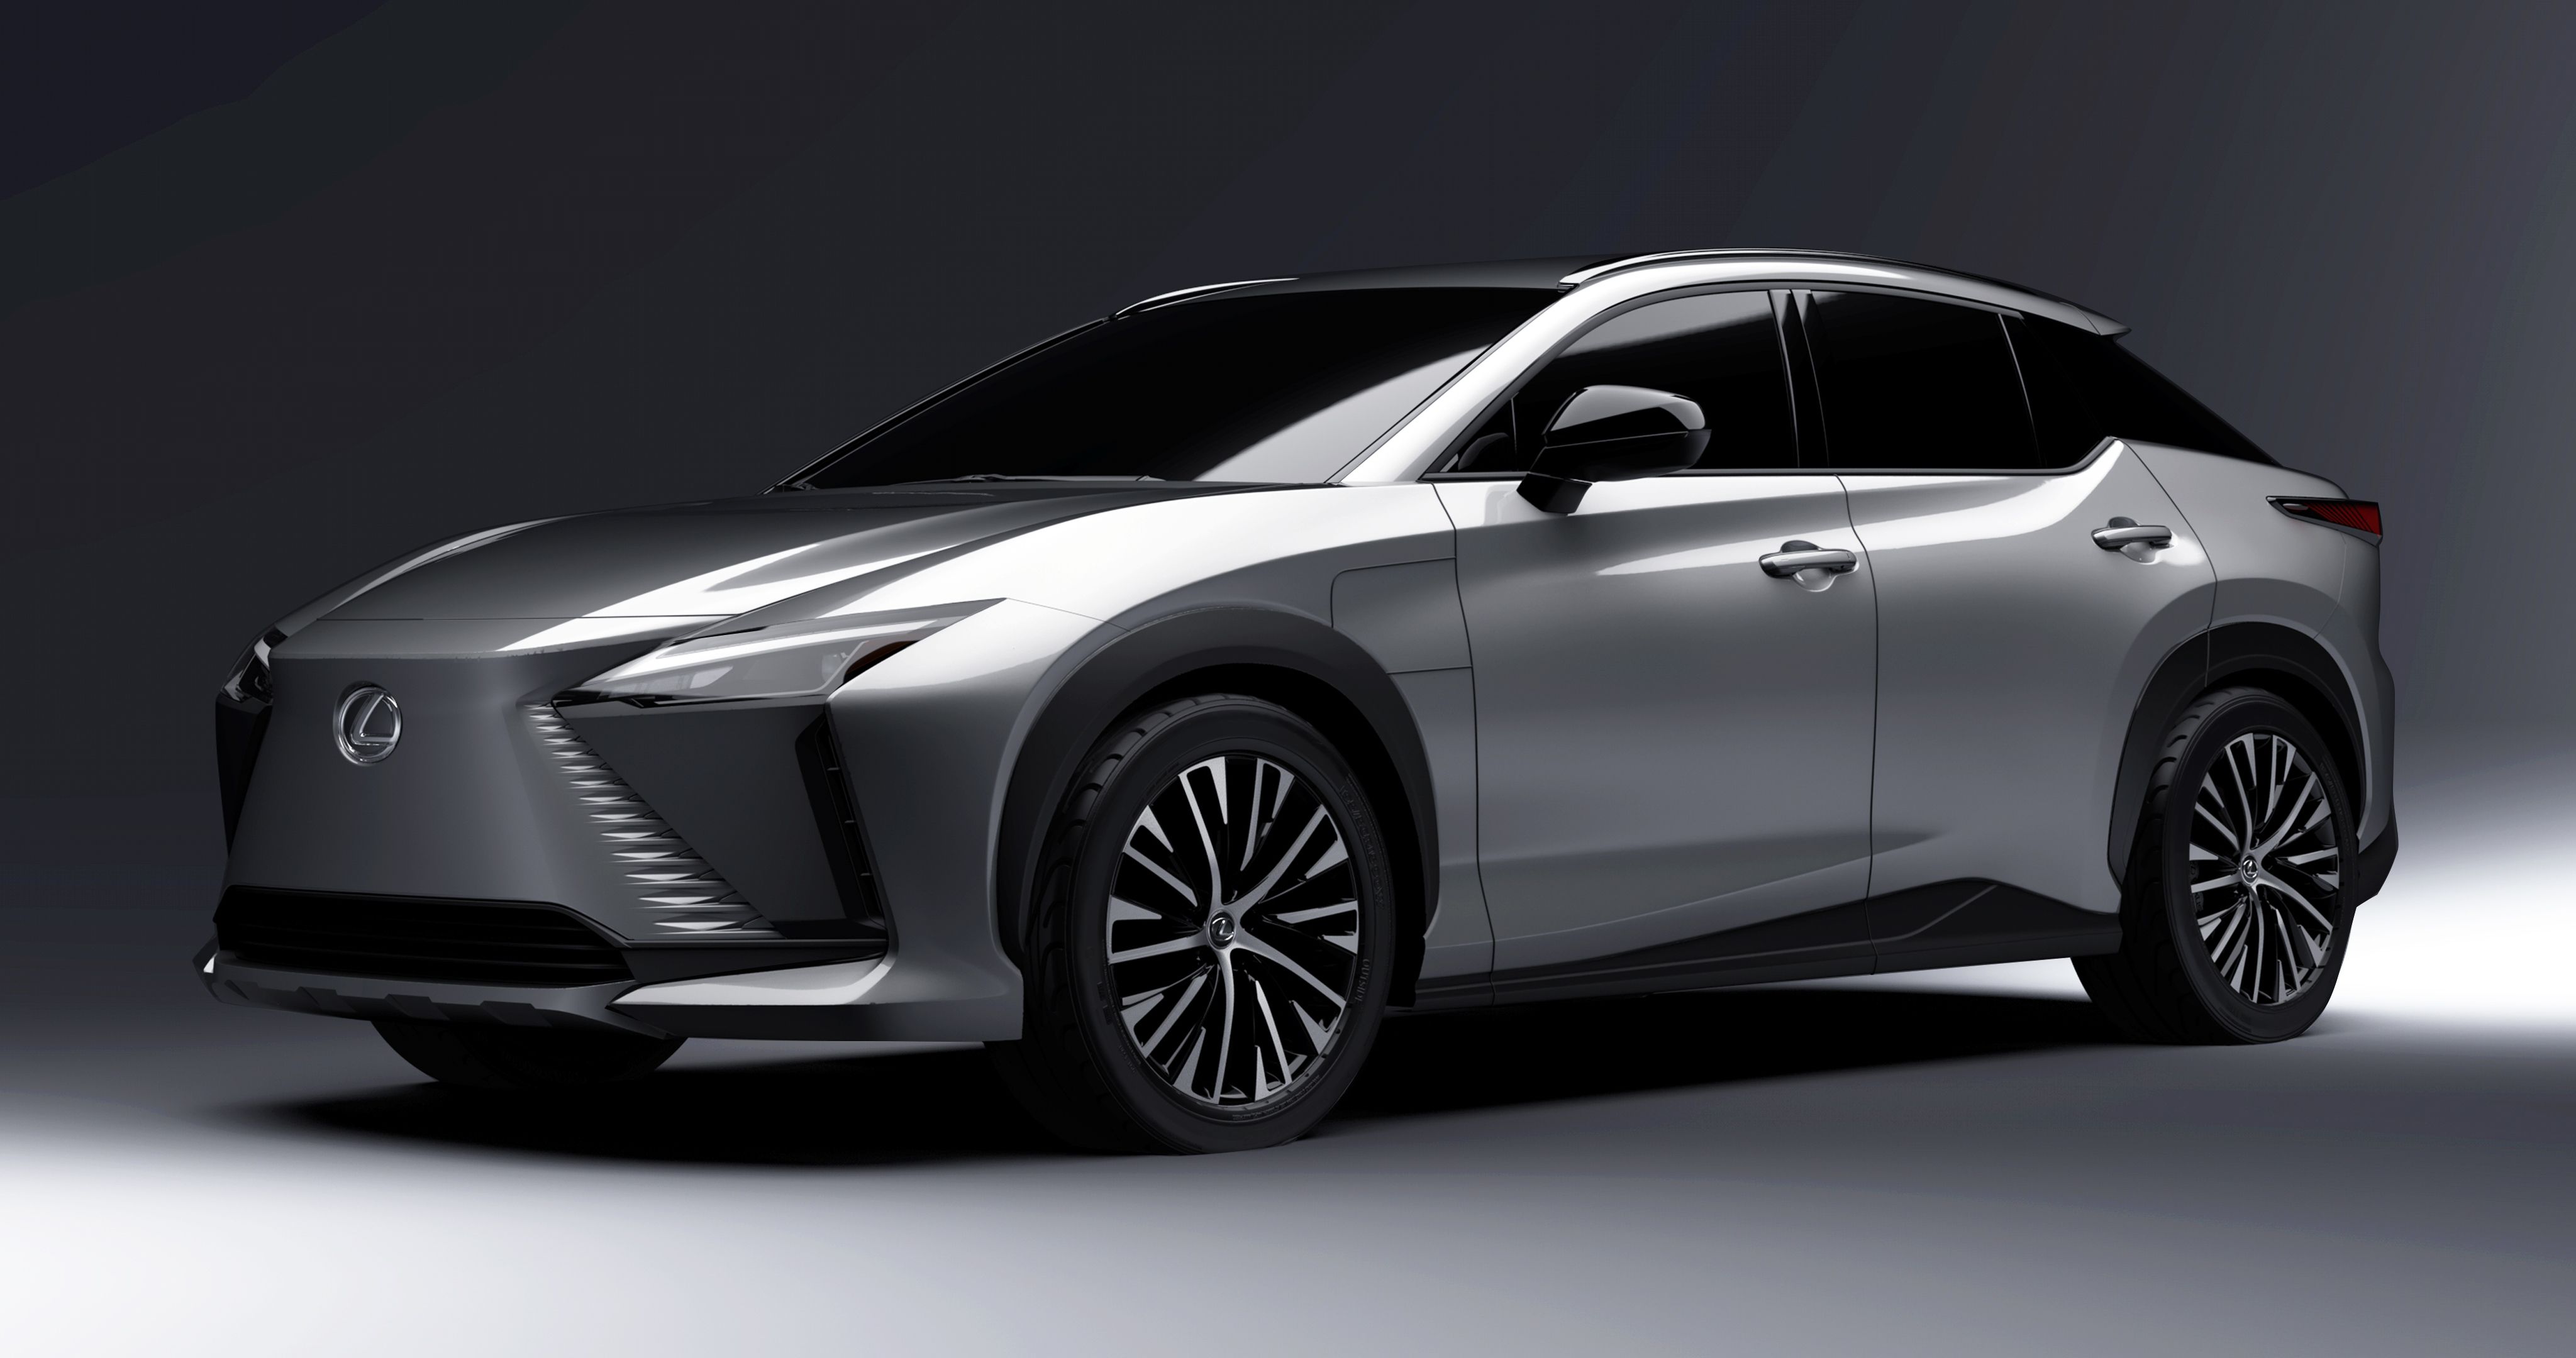 Lexus goes electric: Toyota's luxury brand plans to launch 30 models by the end of the decade